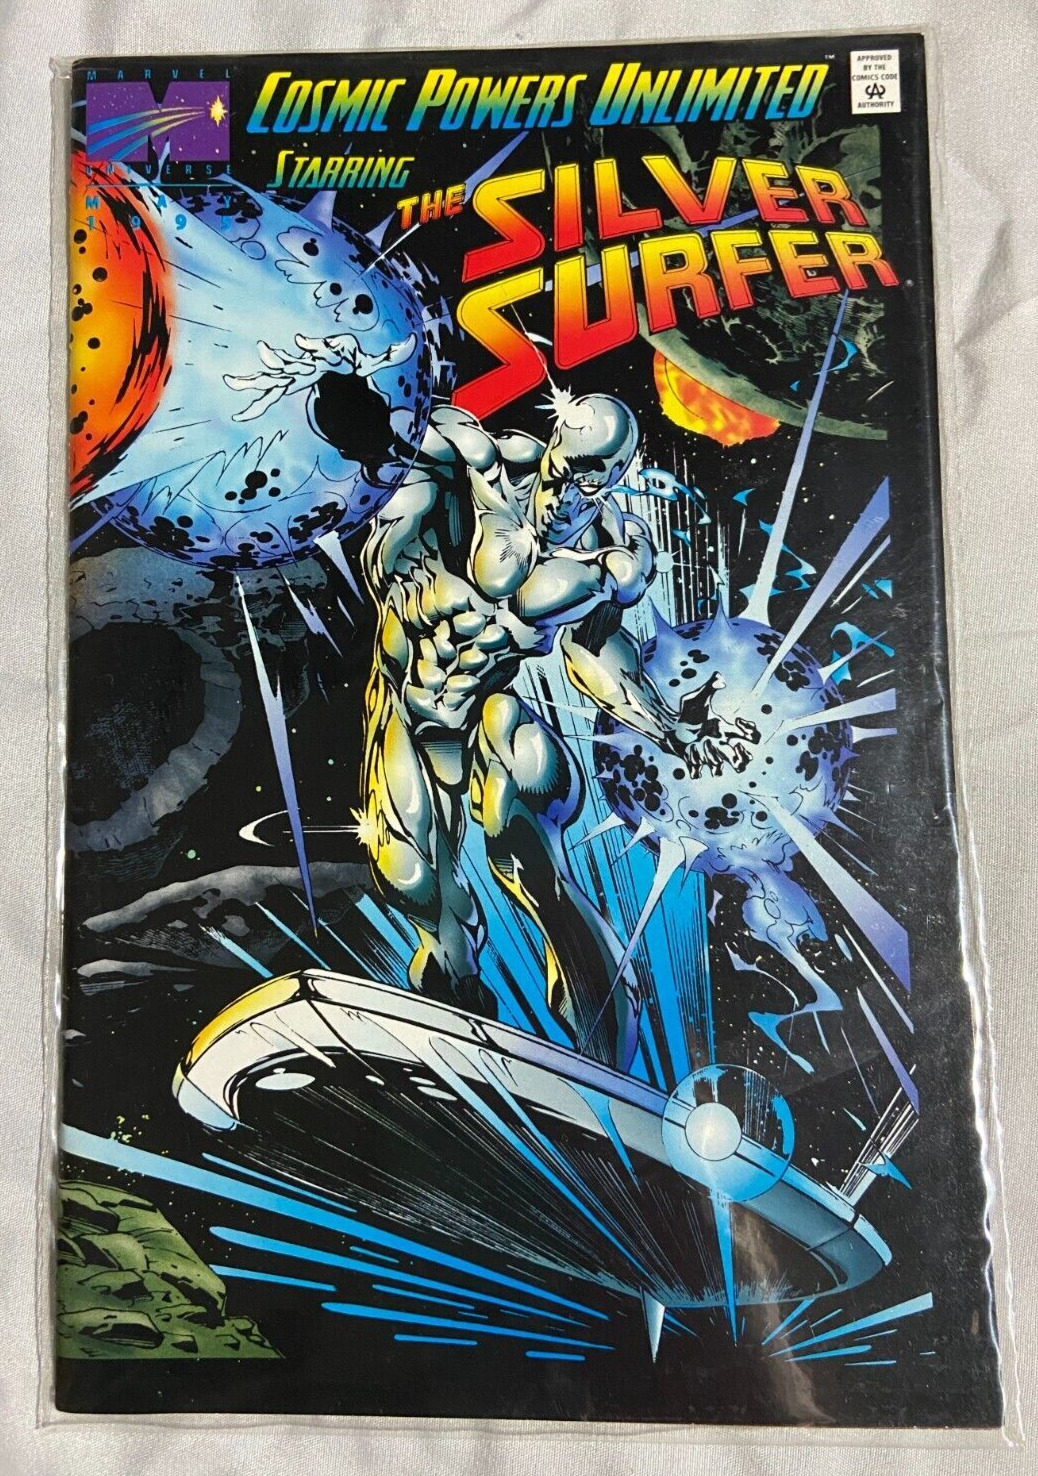 COSMIC POWERS UNLIMITED STARRING THE SILVER SURFER #1 (May 1995, Marvel) Direct